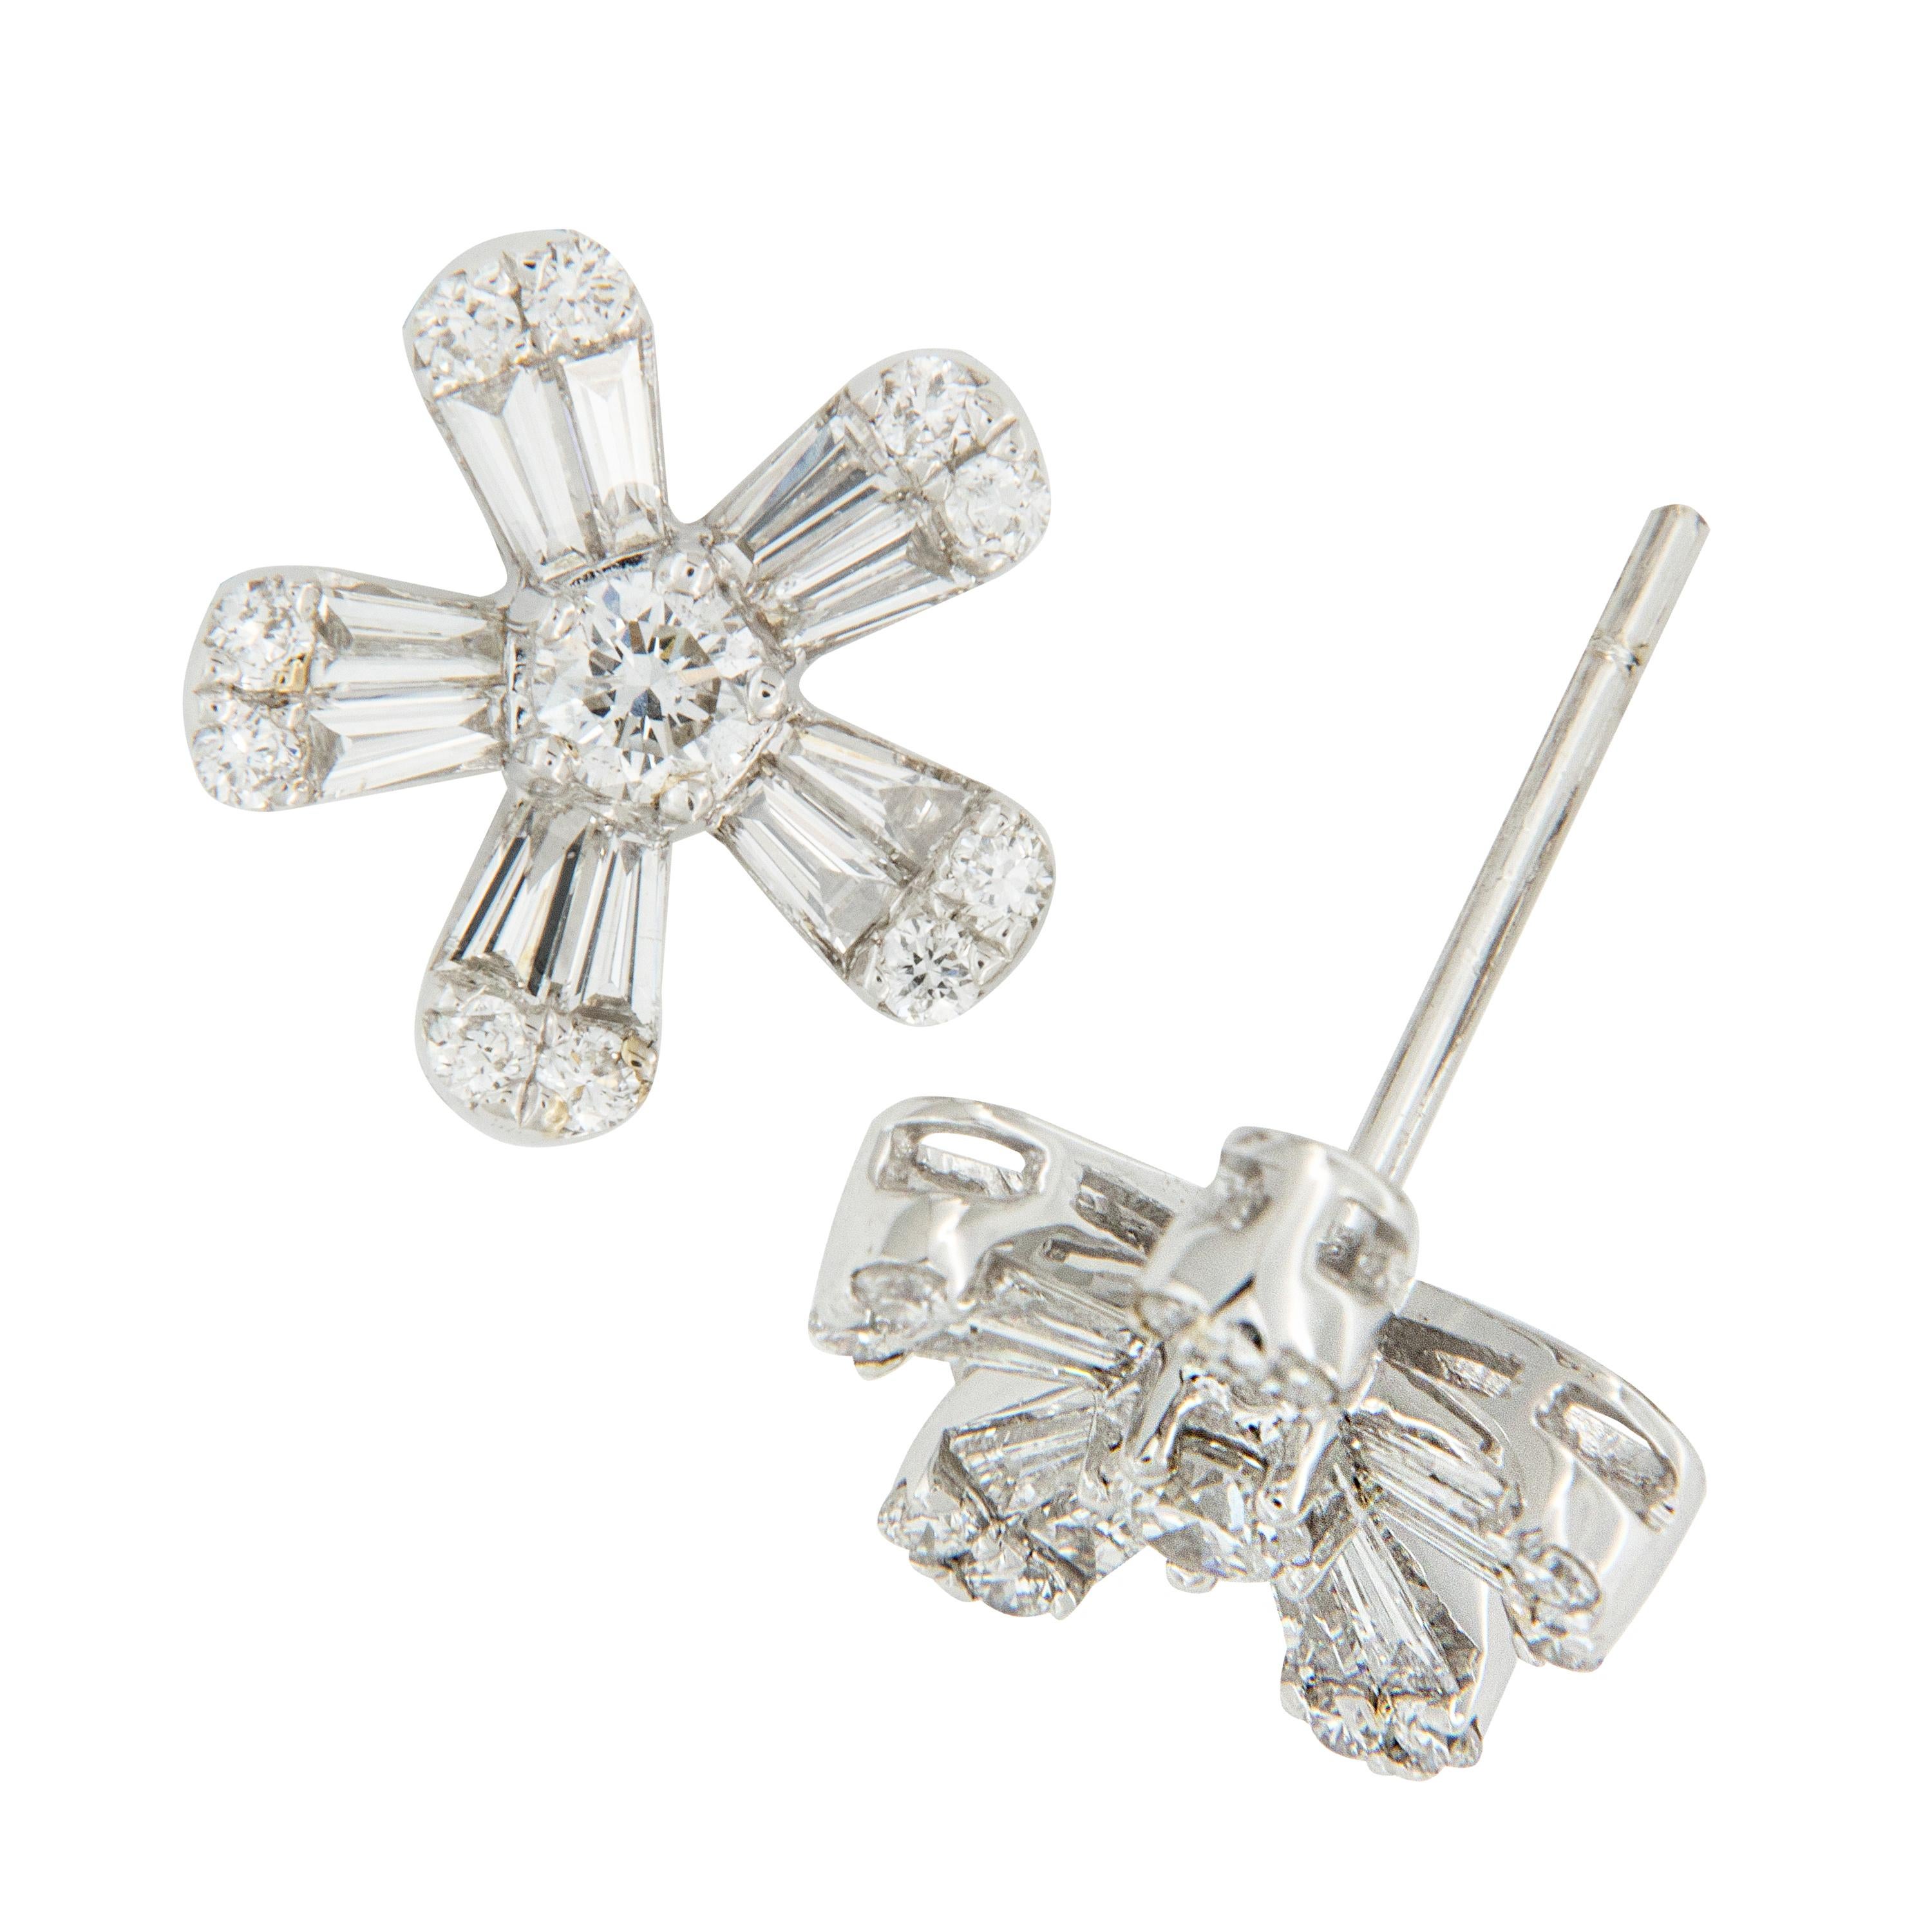 How cute are these 18 karat white gold diamond earrings? 0.24 Cttw tapered baguette & round diamonds form adorable floral star shapes that fit perfectly on your ear with posts & friction backs! 

Diamonds = 0.41 Cttw
18KWG
10.5 x 10.5mm